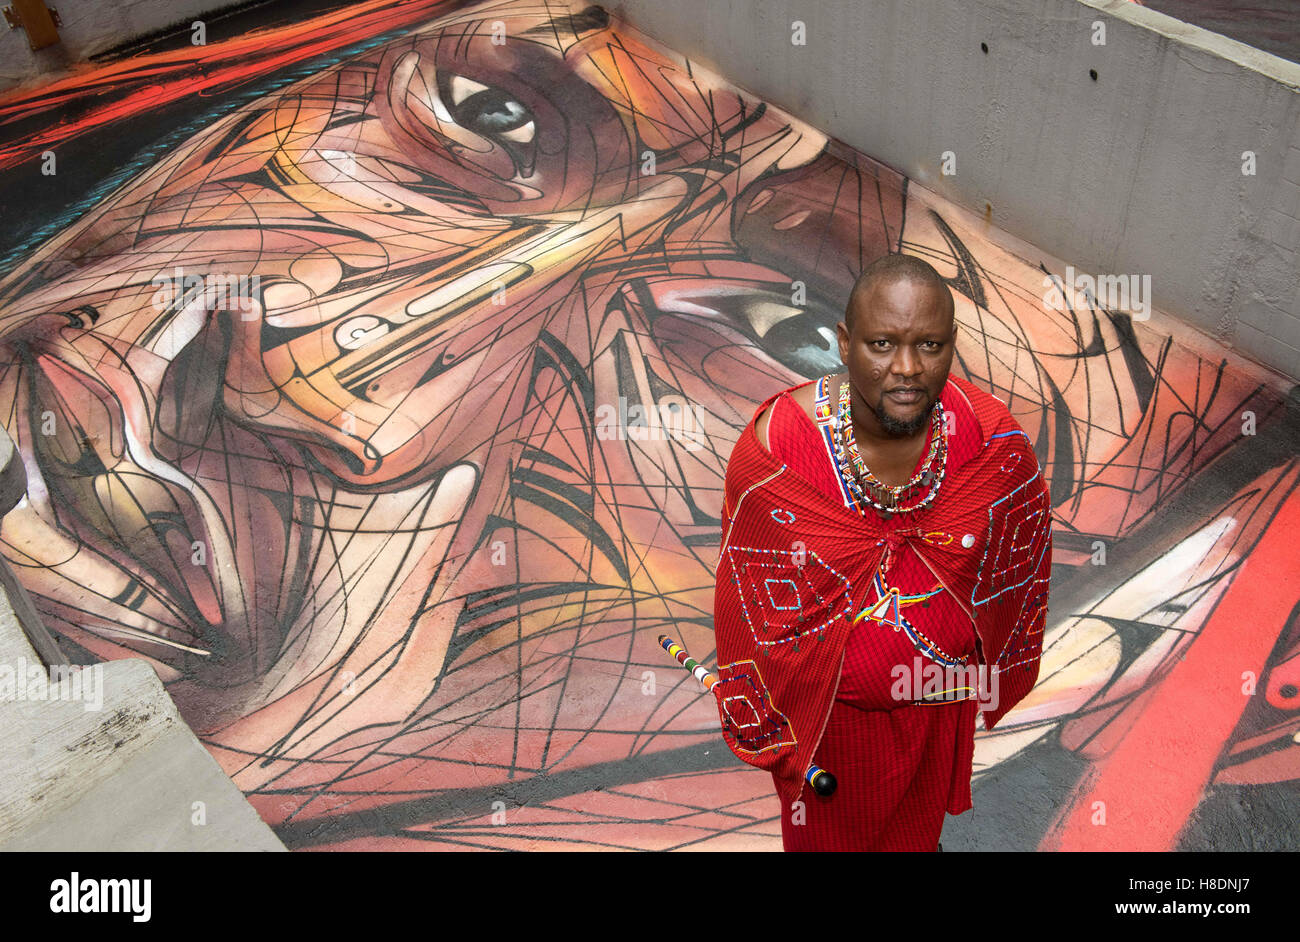 Hong Kong, Hong Kong S.A.R, China. 10th Nov, 2016. Masai warrior and representative of the Big Life foundation in Kenya, Daniel Ole Sambu, with the rooftop painting of himself painted by famous Parisian street artist Alexandre Monteiro aka Hopare.Street art in Hong Kong ahead of the The 'Hope for Wildlife' Gala Dinner painted to raise awareness for the plight of endangered animals the world over.10th November 2016. Photo by Jayne Russell. © Jayne Russell/ZUMA Wire/Alamy Live News Stock Photo